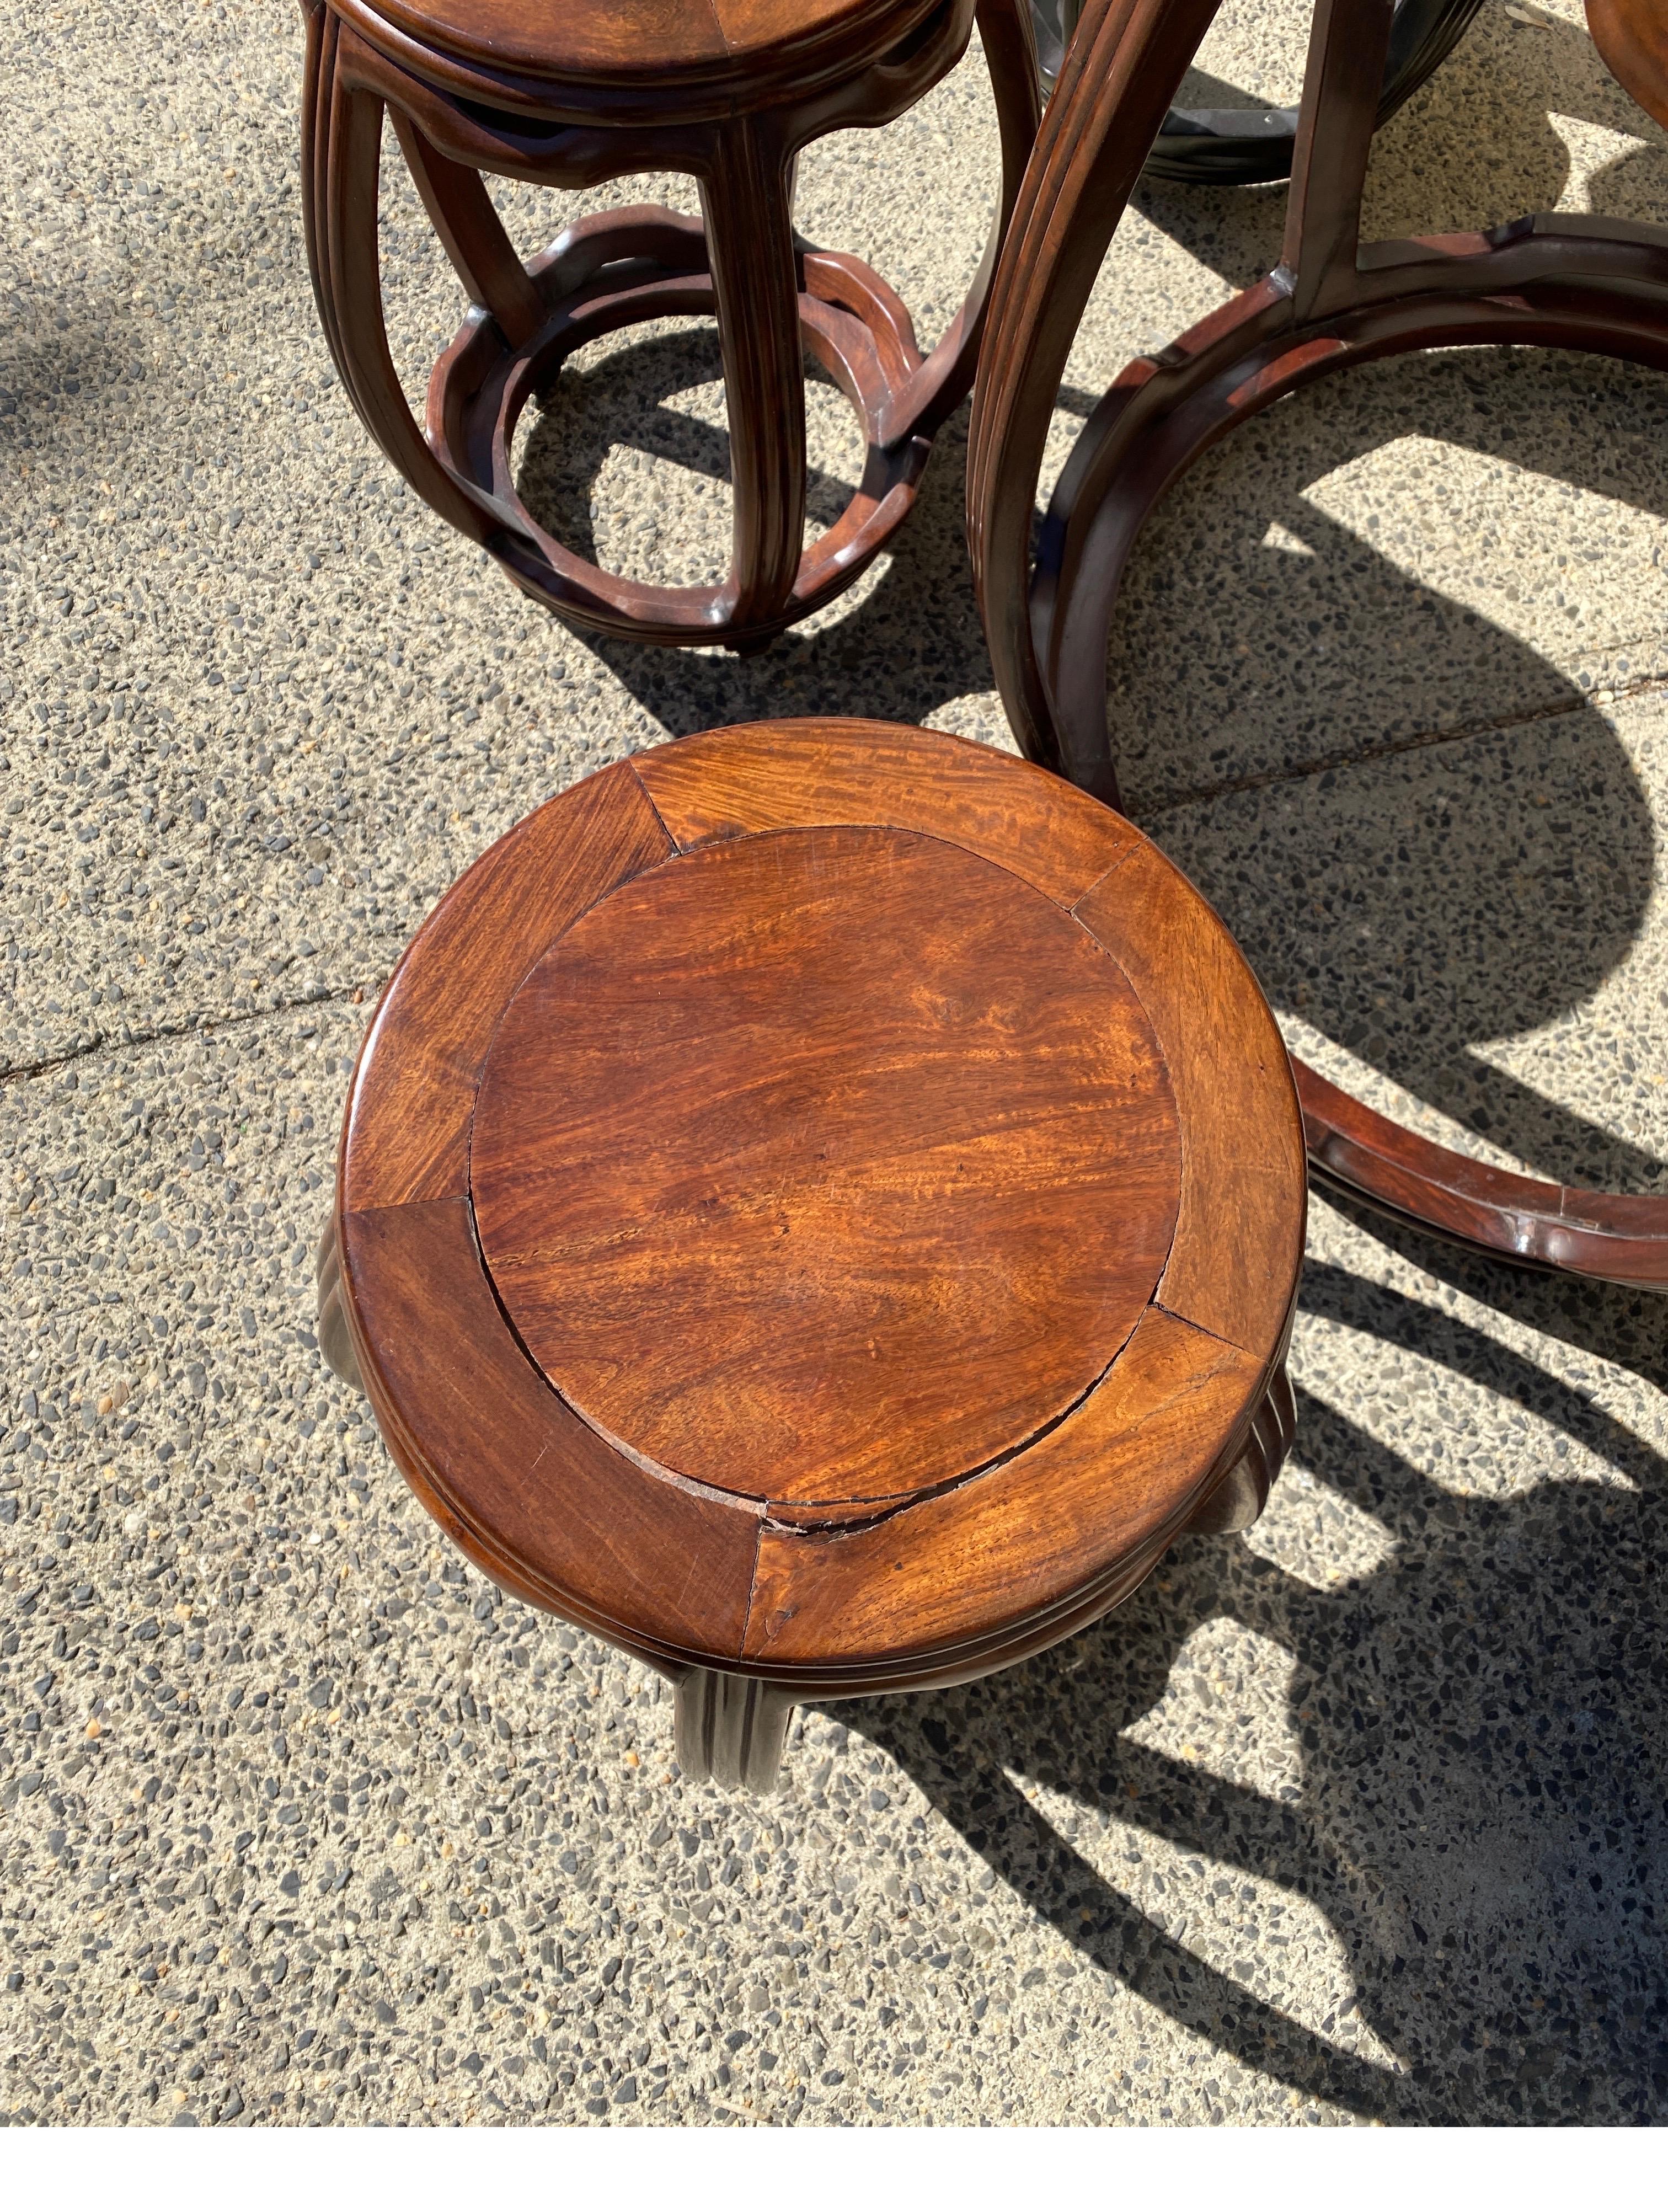 Hardwood Early 20th Century Set of Chinese Barrel Form Table with Stools For Sale